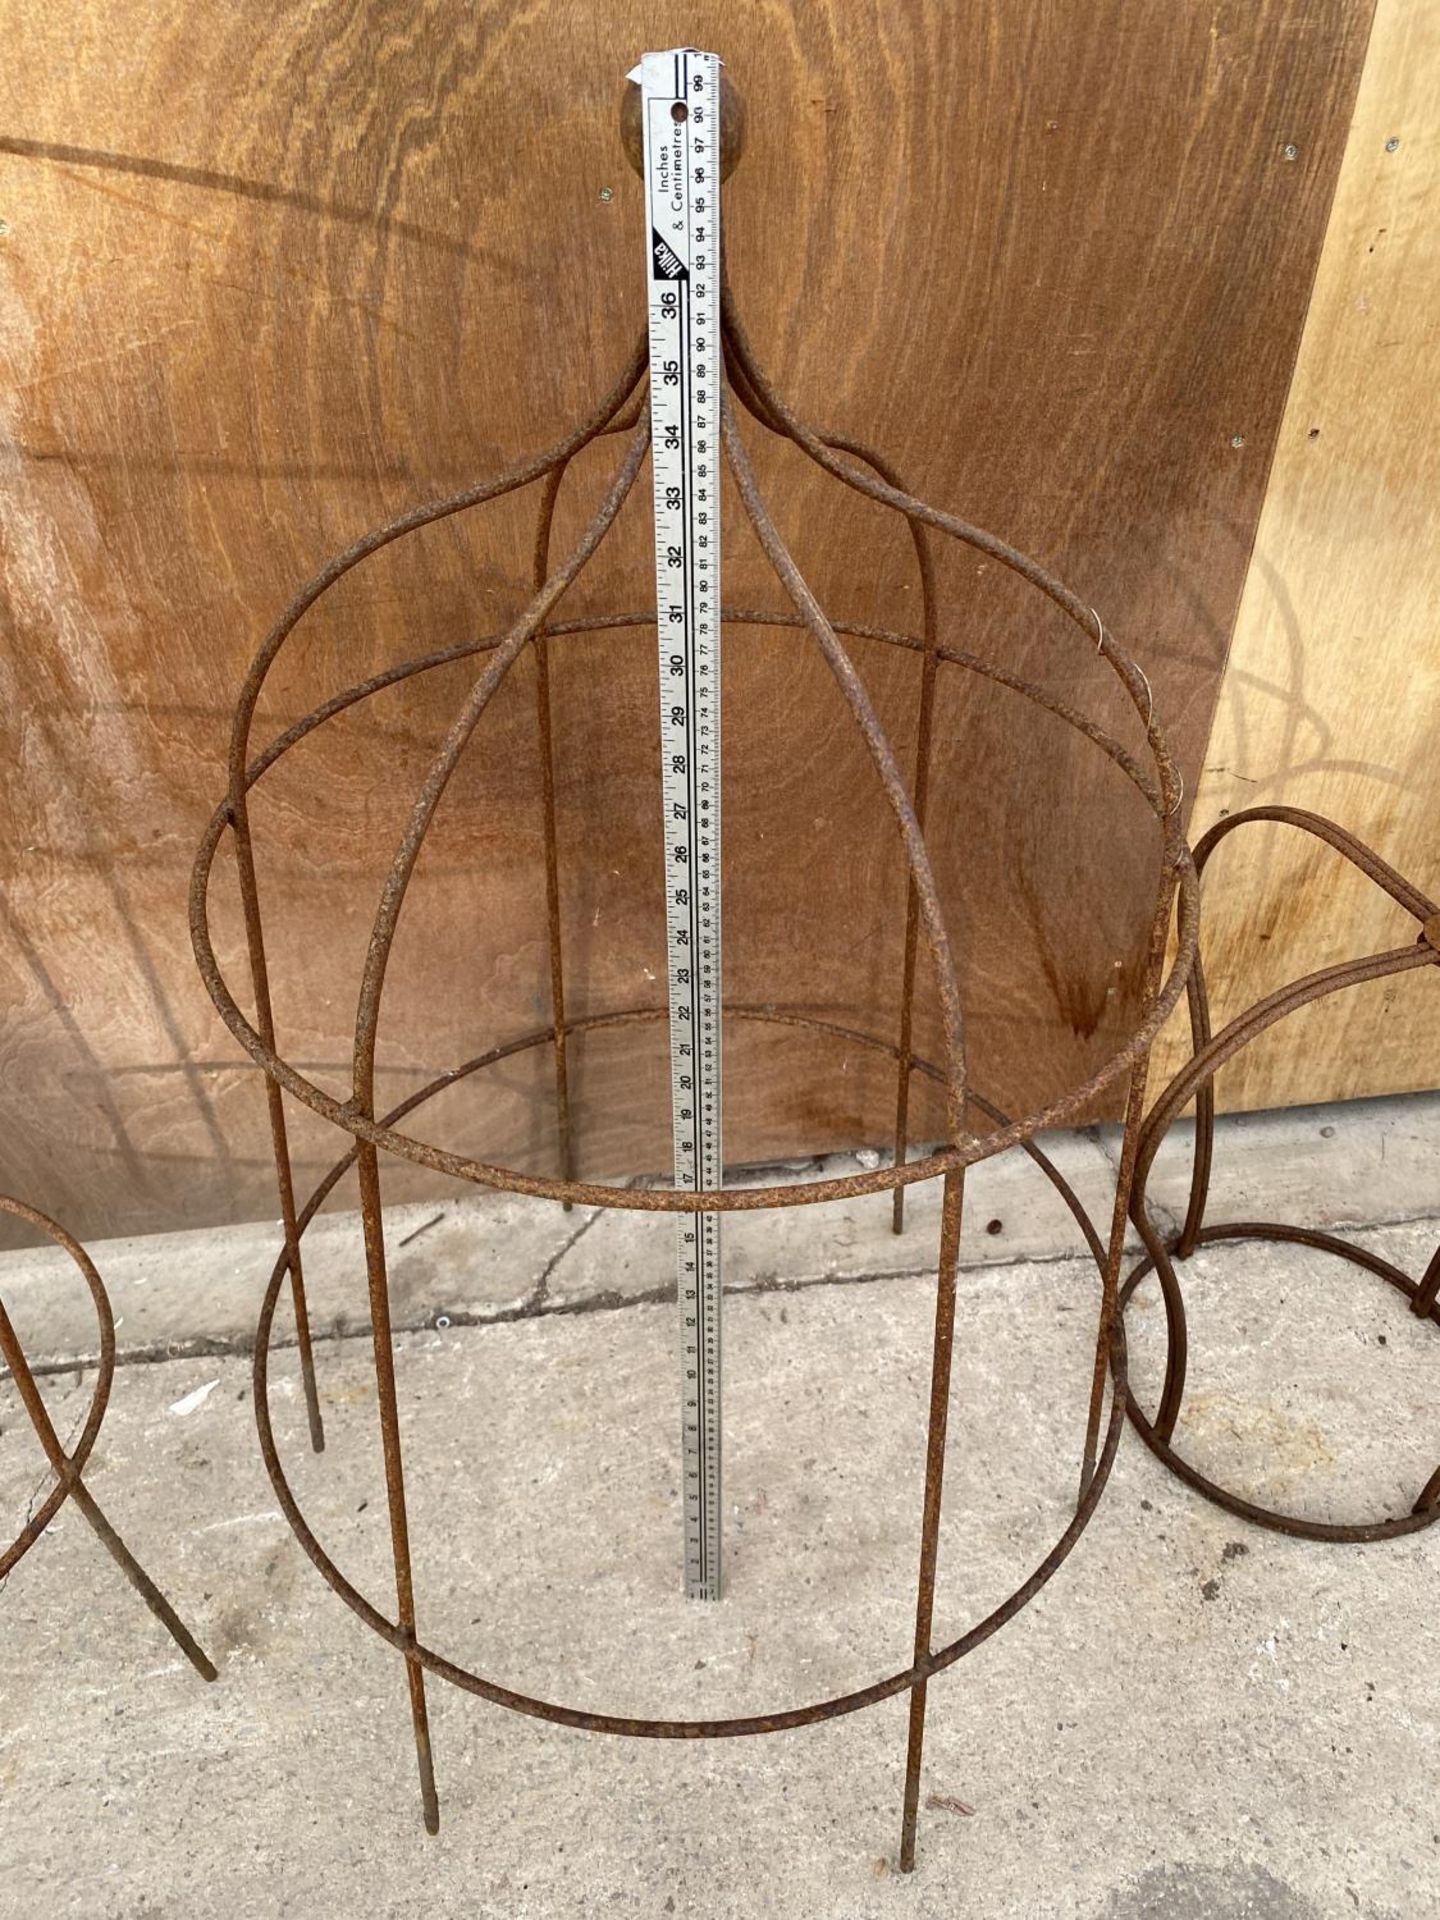 A WROUGHT IRON DOME SHAPED PLANT CLIMBING FRAME (H:99CM) - Image 2 of 2